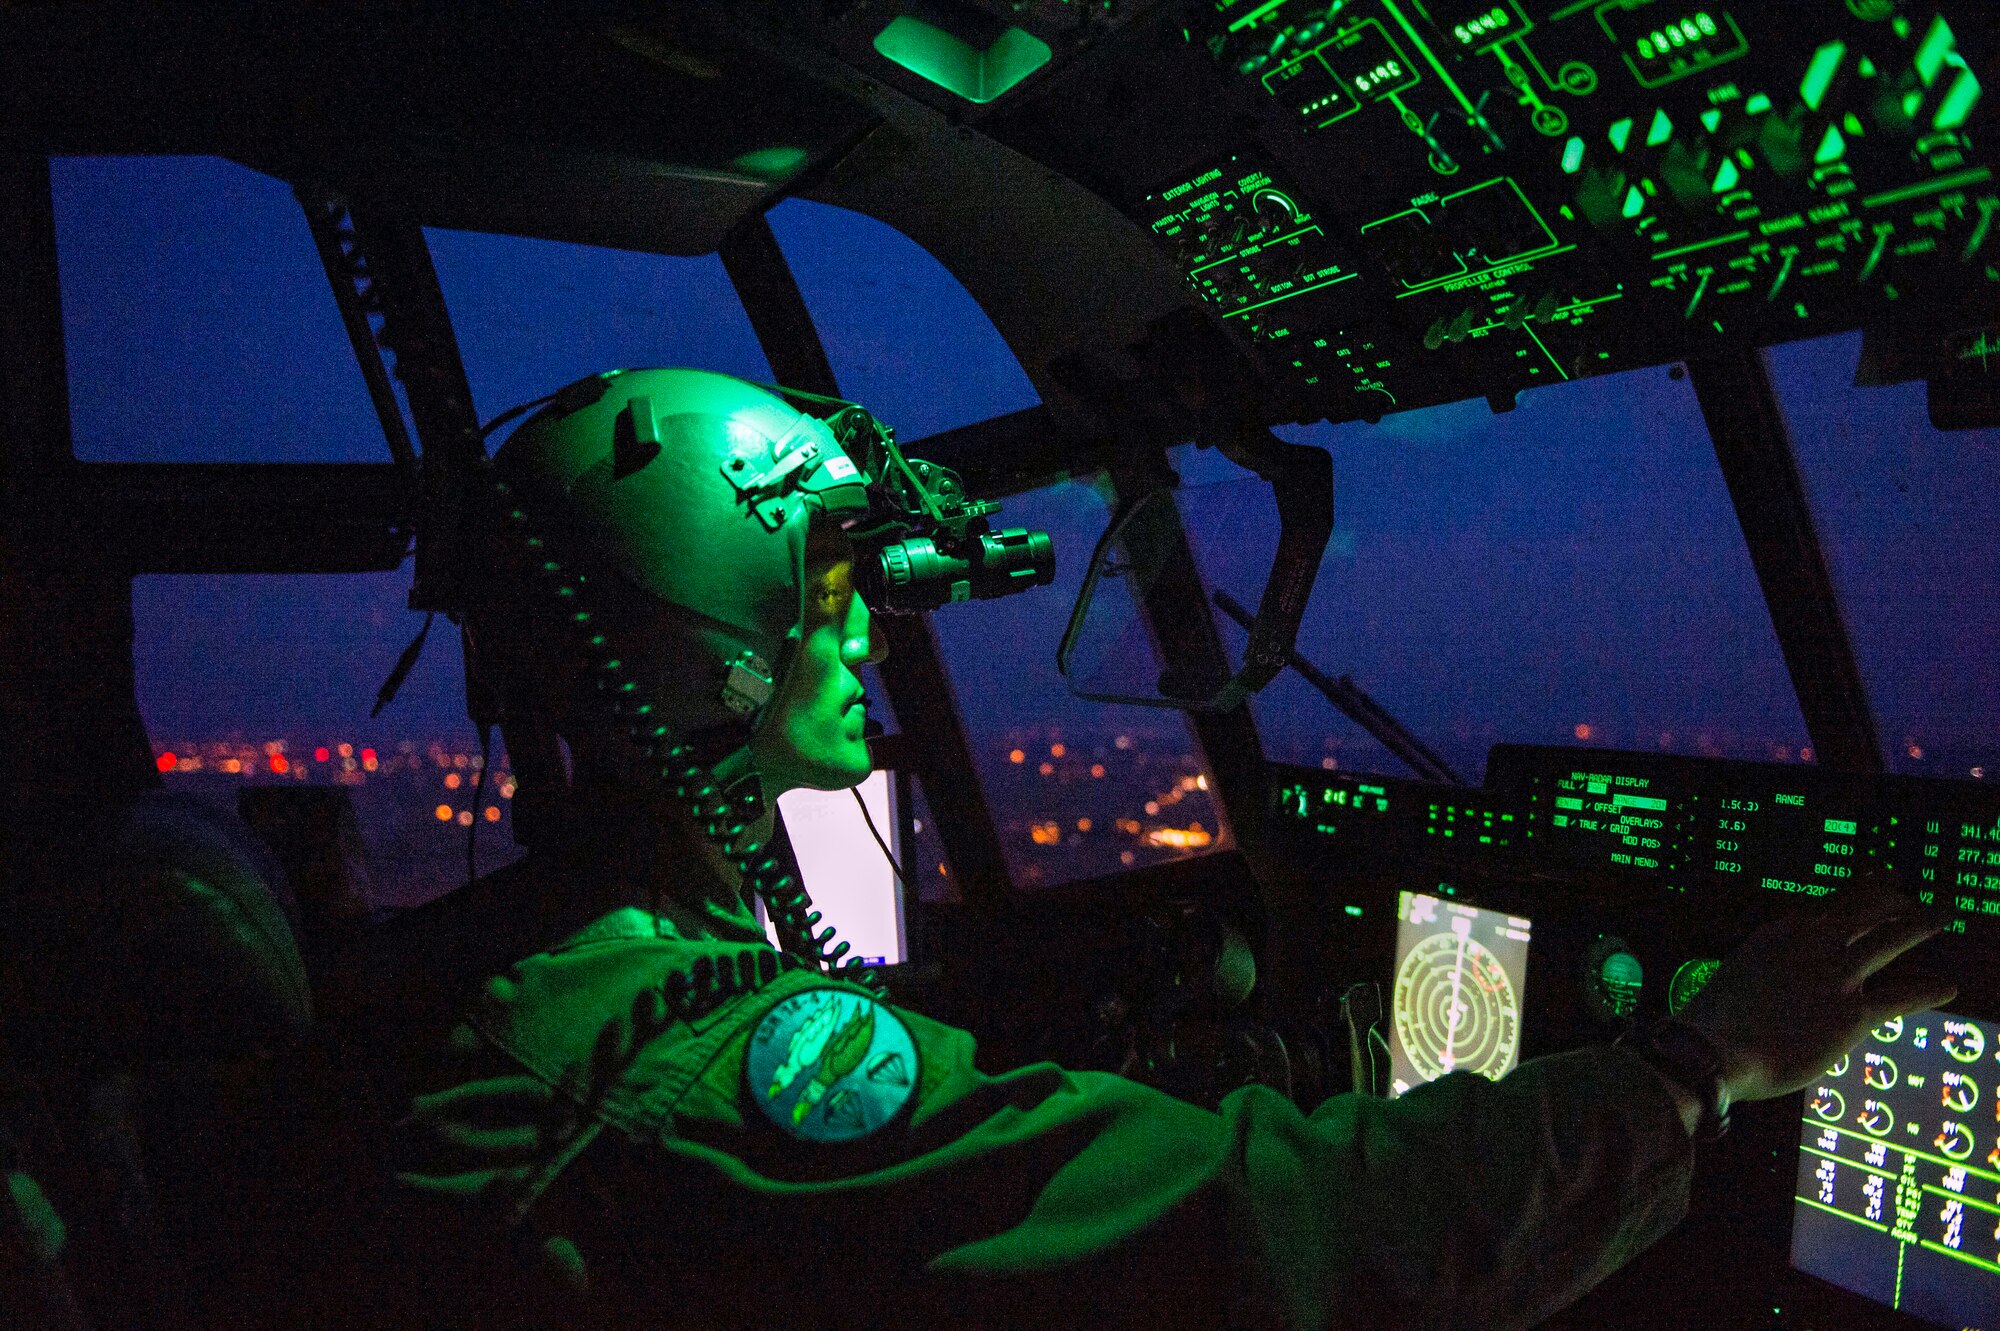 Capt. Leland Quinter, 37th Airlift Squadron C-130J Super Hercules pilot, wears night vision goggles during a training flight over Poland Aug. 2, 2018. C-130J pilots train to fly in multiple complex scenarios in various atmospheric conditions. (U.S. Air Force photo by Senior Airman Joshua Magbanua)